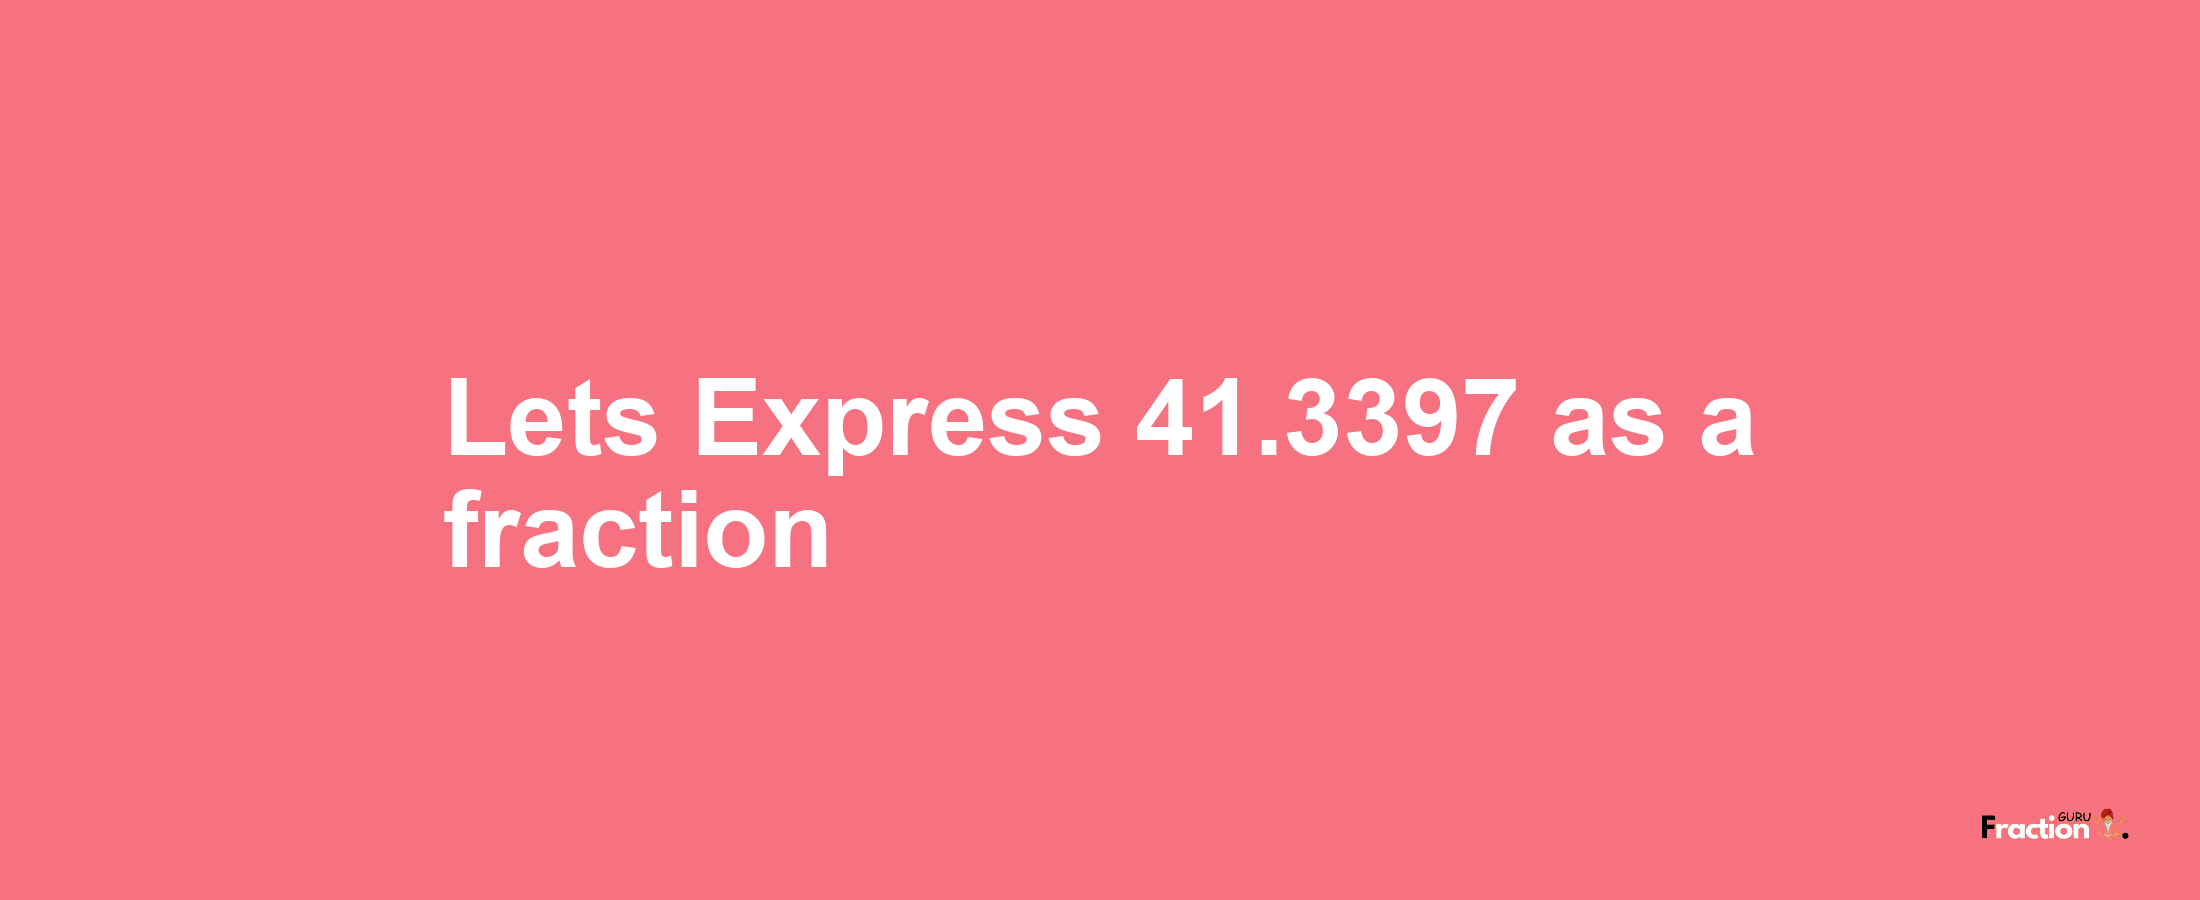 Lets Express 41.3397 as afraction